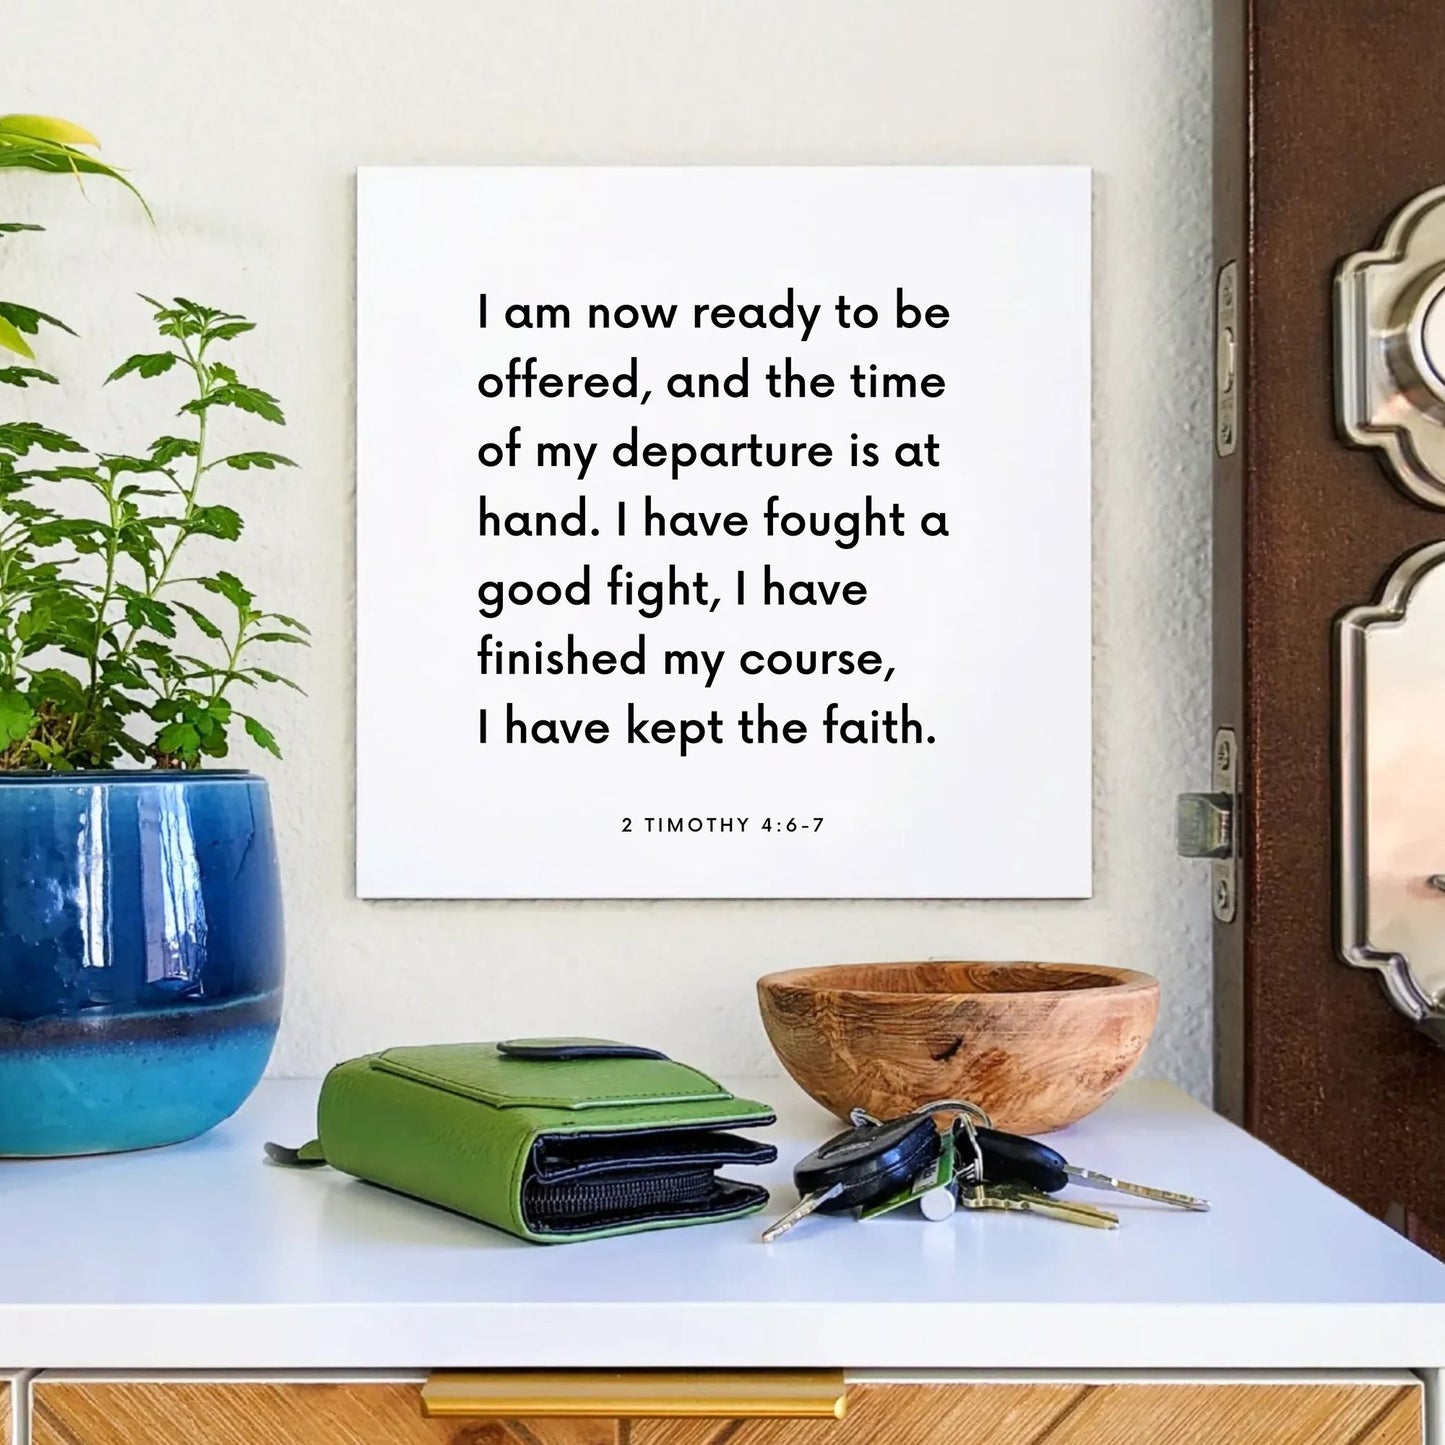 Entryway mouting of the scripture tile for 2 Timothy 4:6-7 - "I have fought a good fight, I have kept the faith"